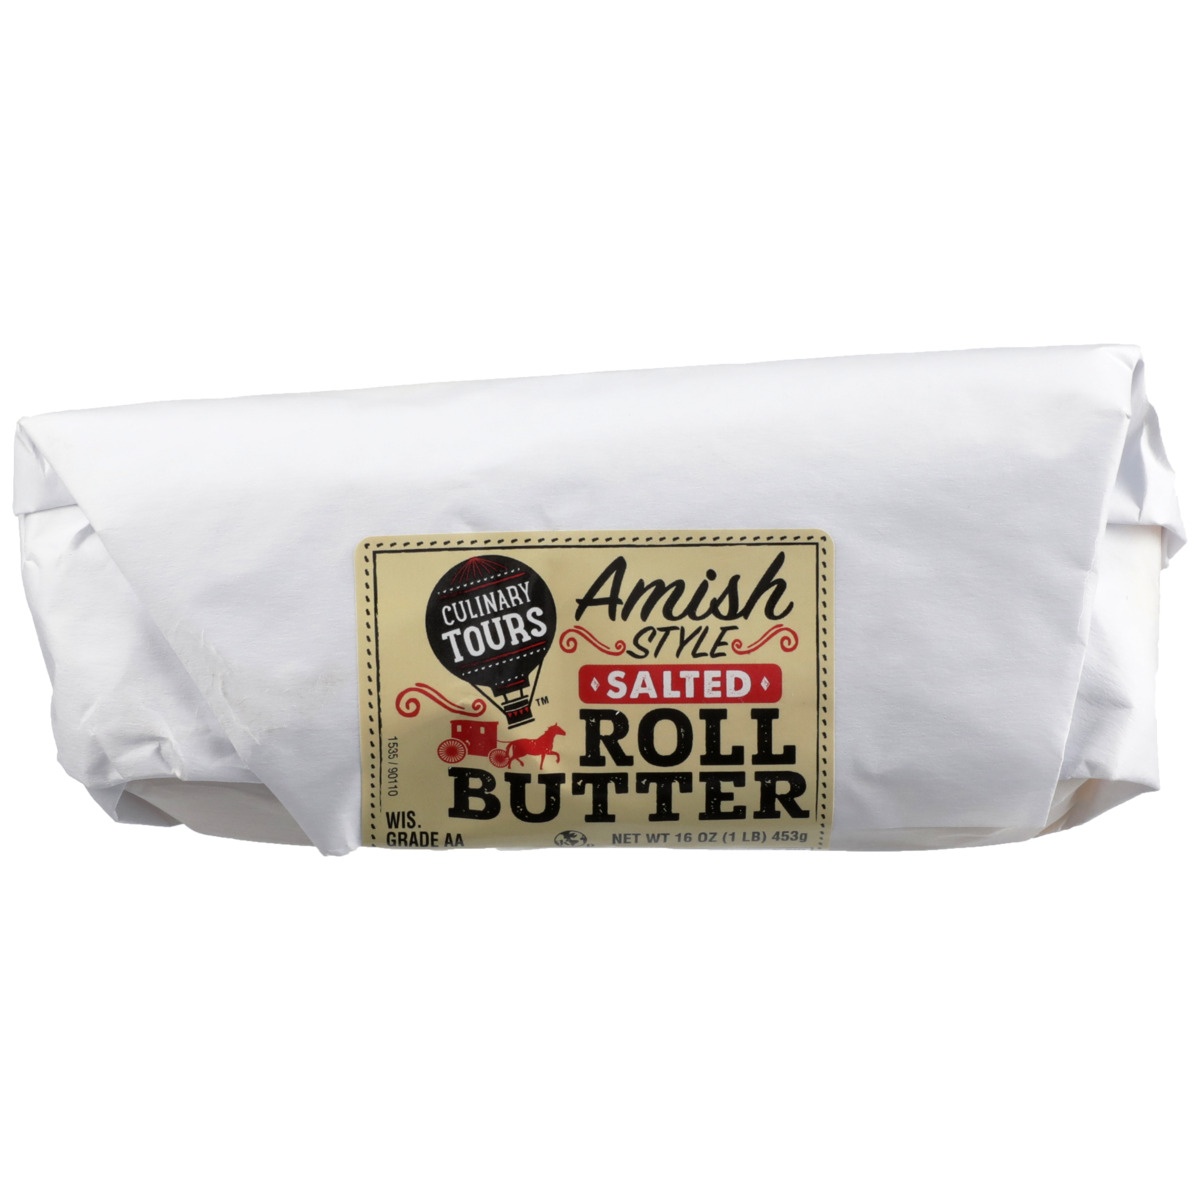 slide 9 of 10, Culinary Tours Salted Amish Style Roll Butter, 16 oz